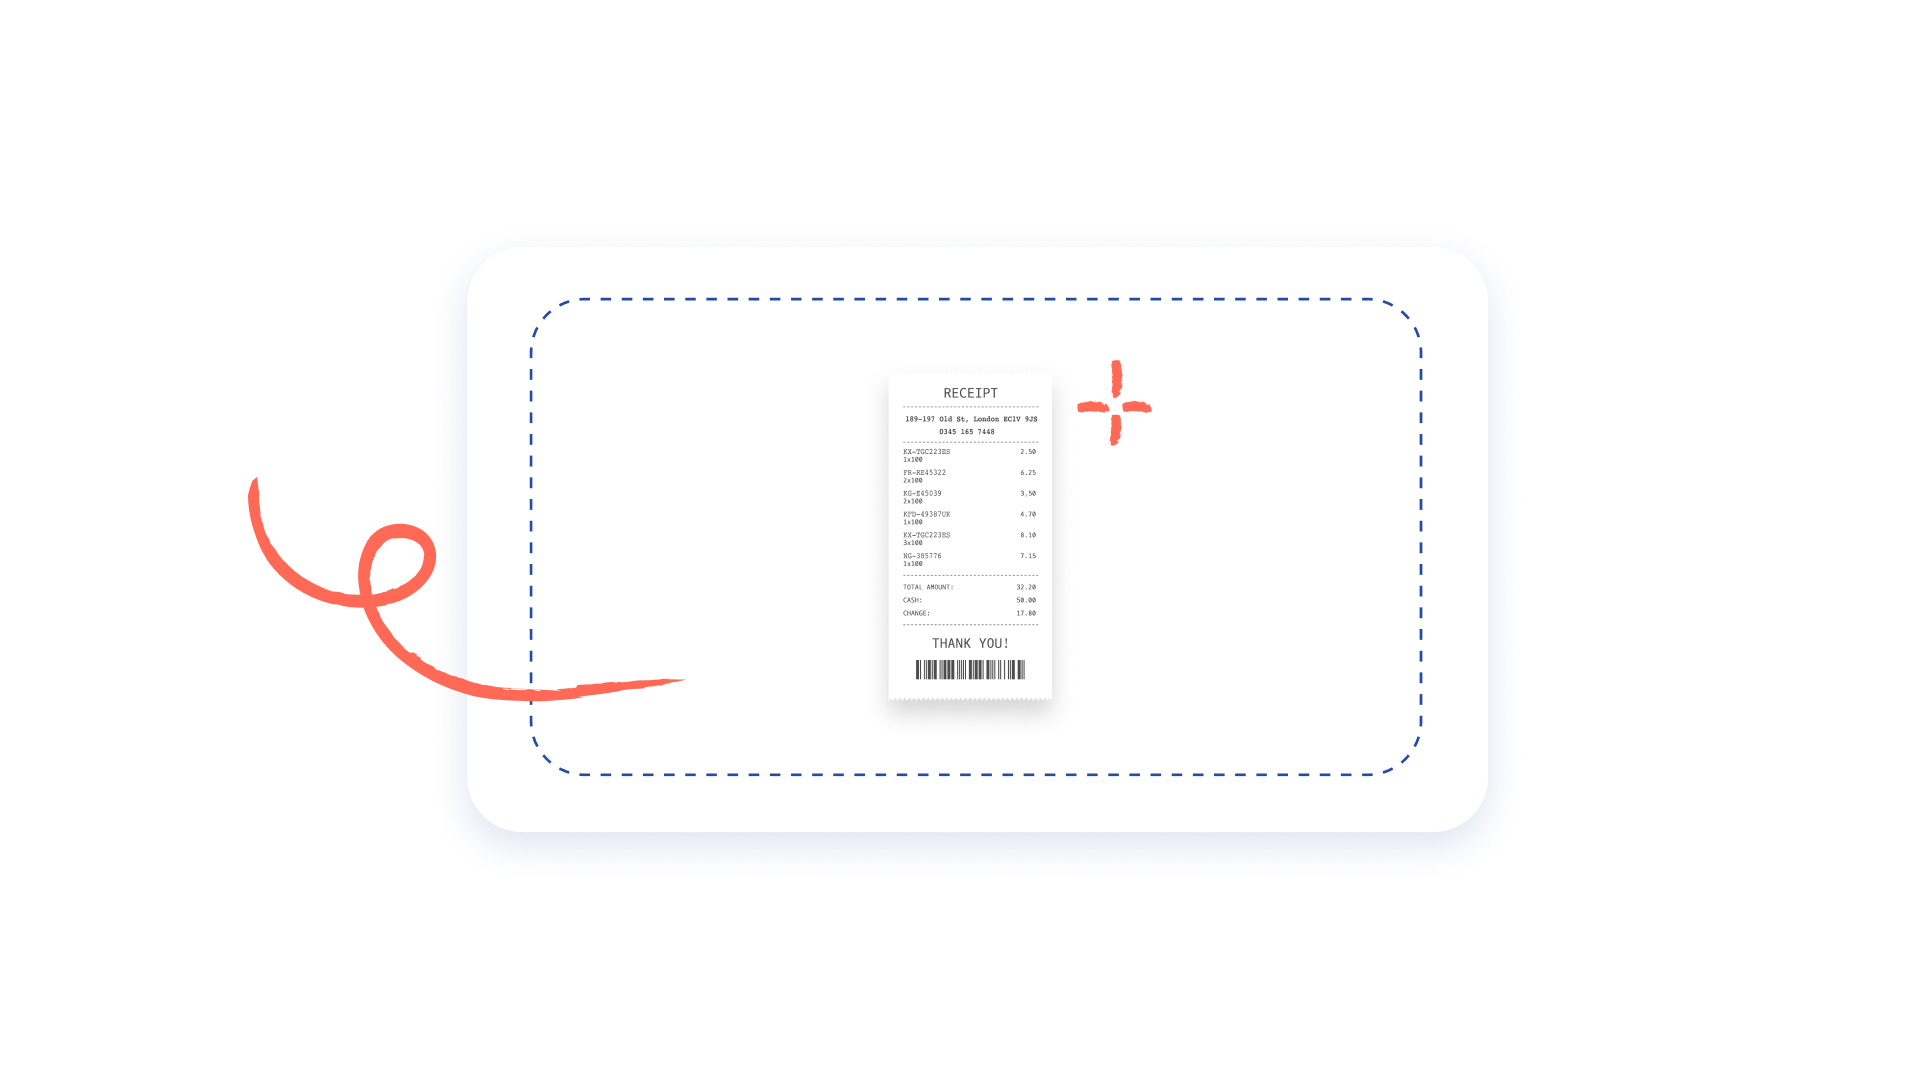 Upload your receipts easily with Osome purchases